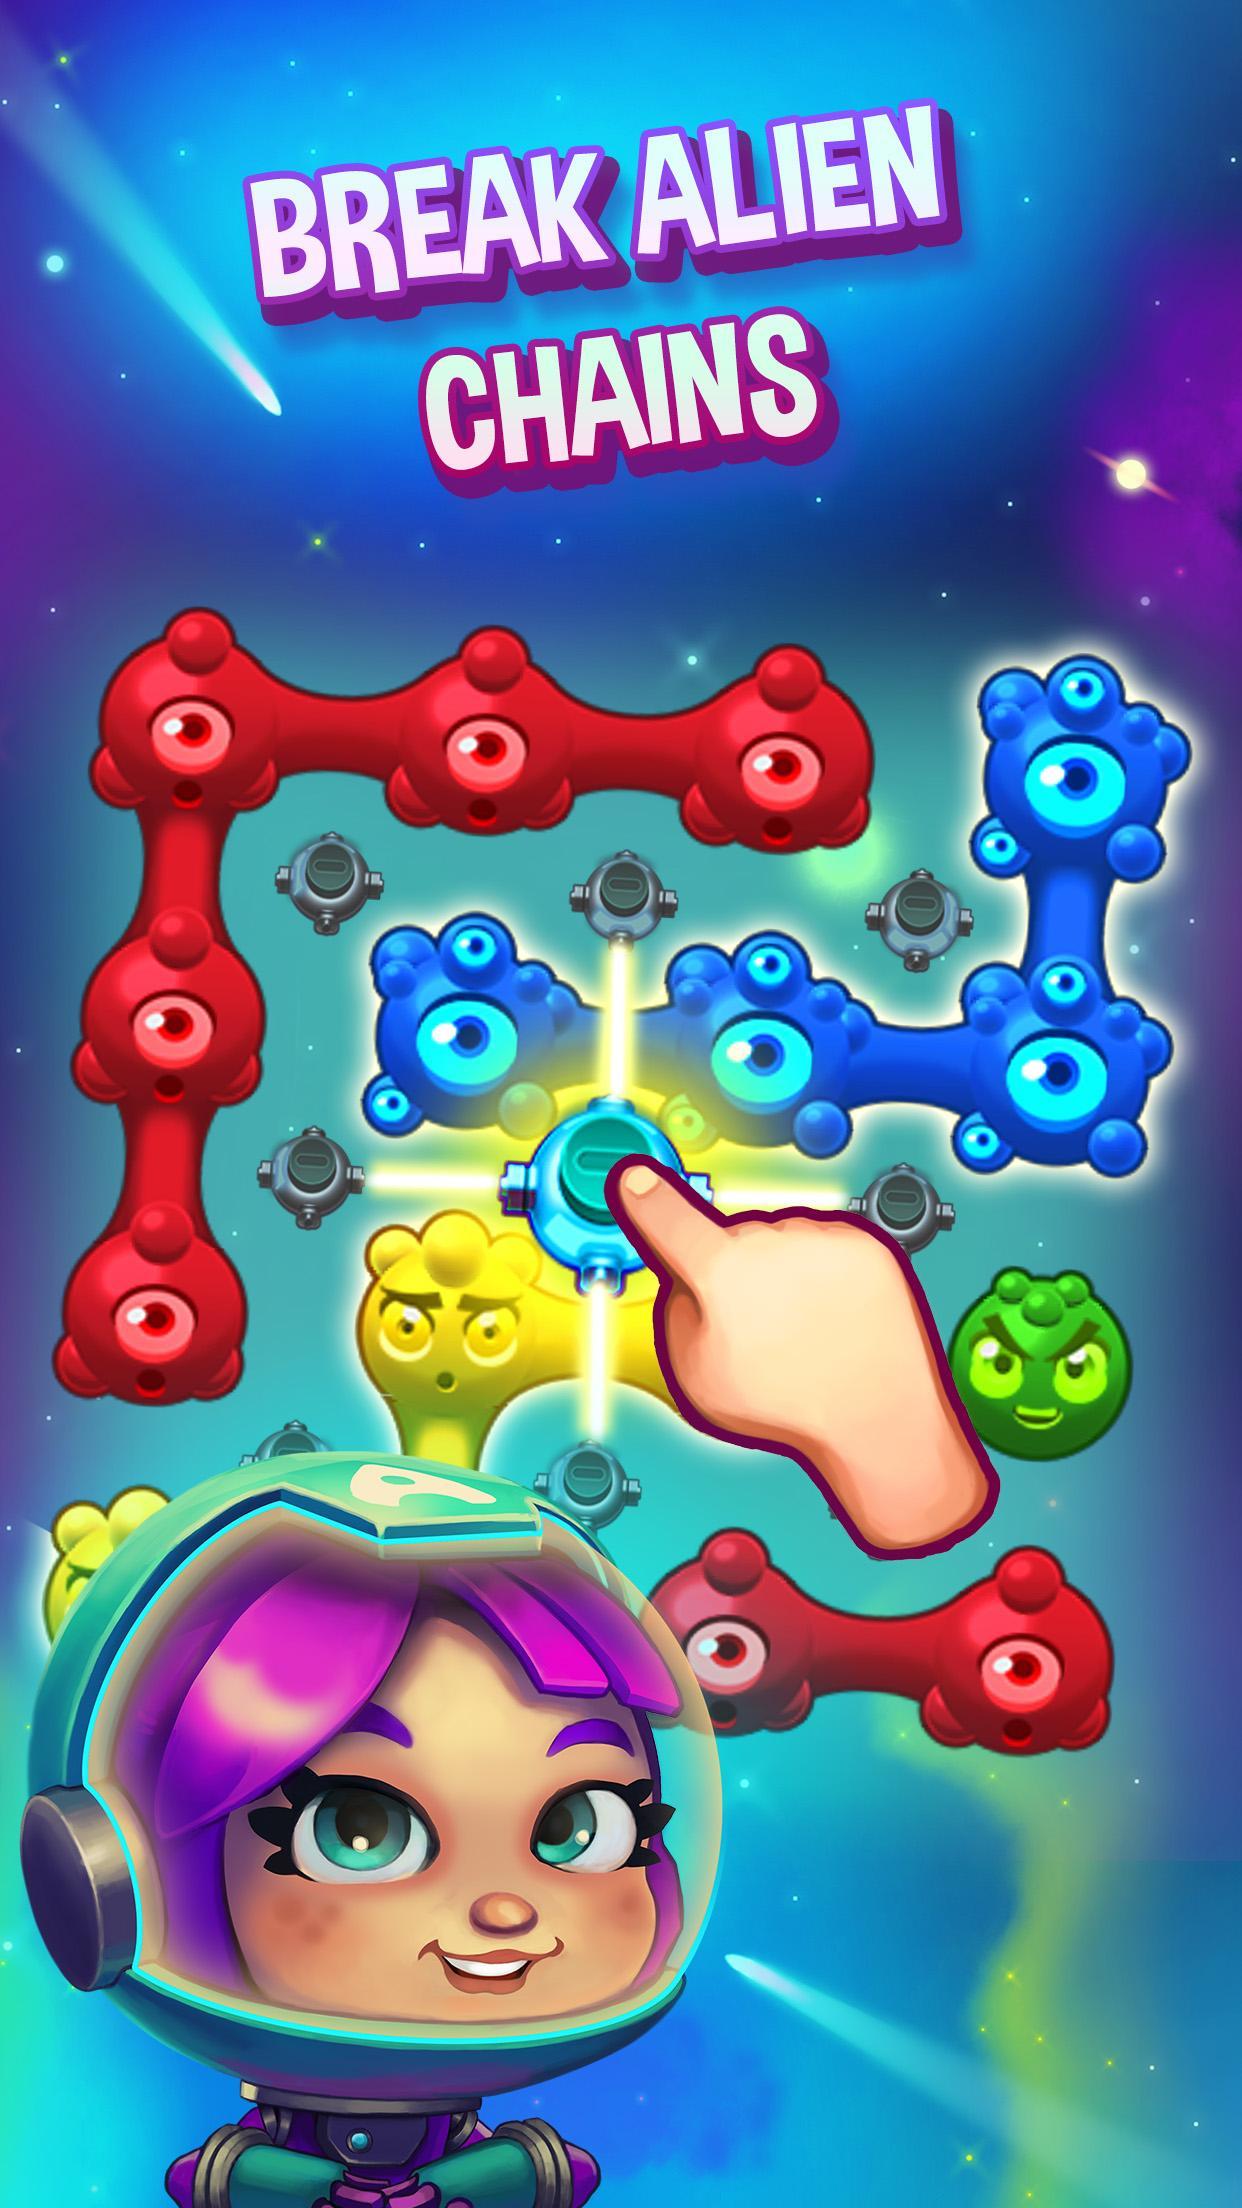 Screenshot 1 of Aliens in Chains - a space jam 0.5.2